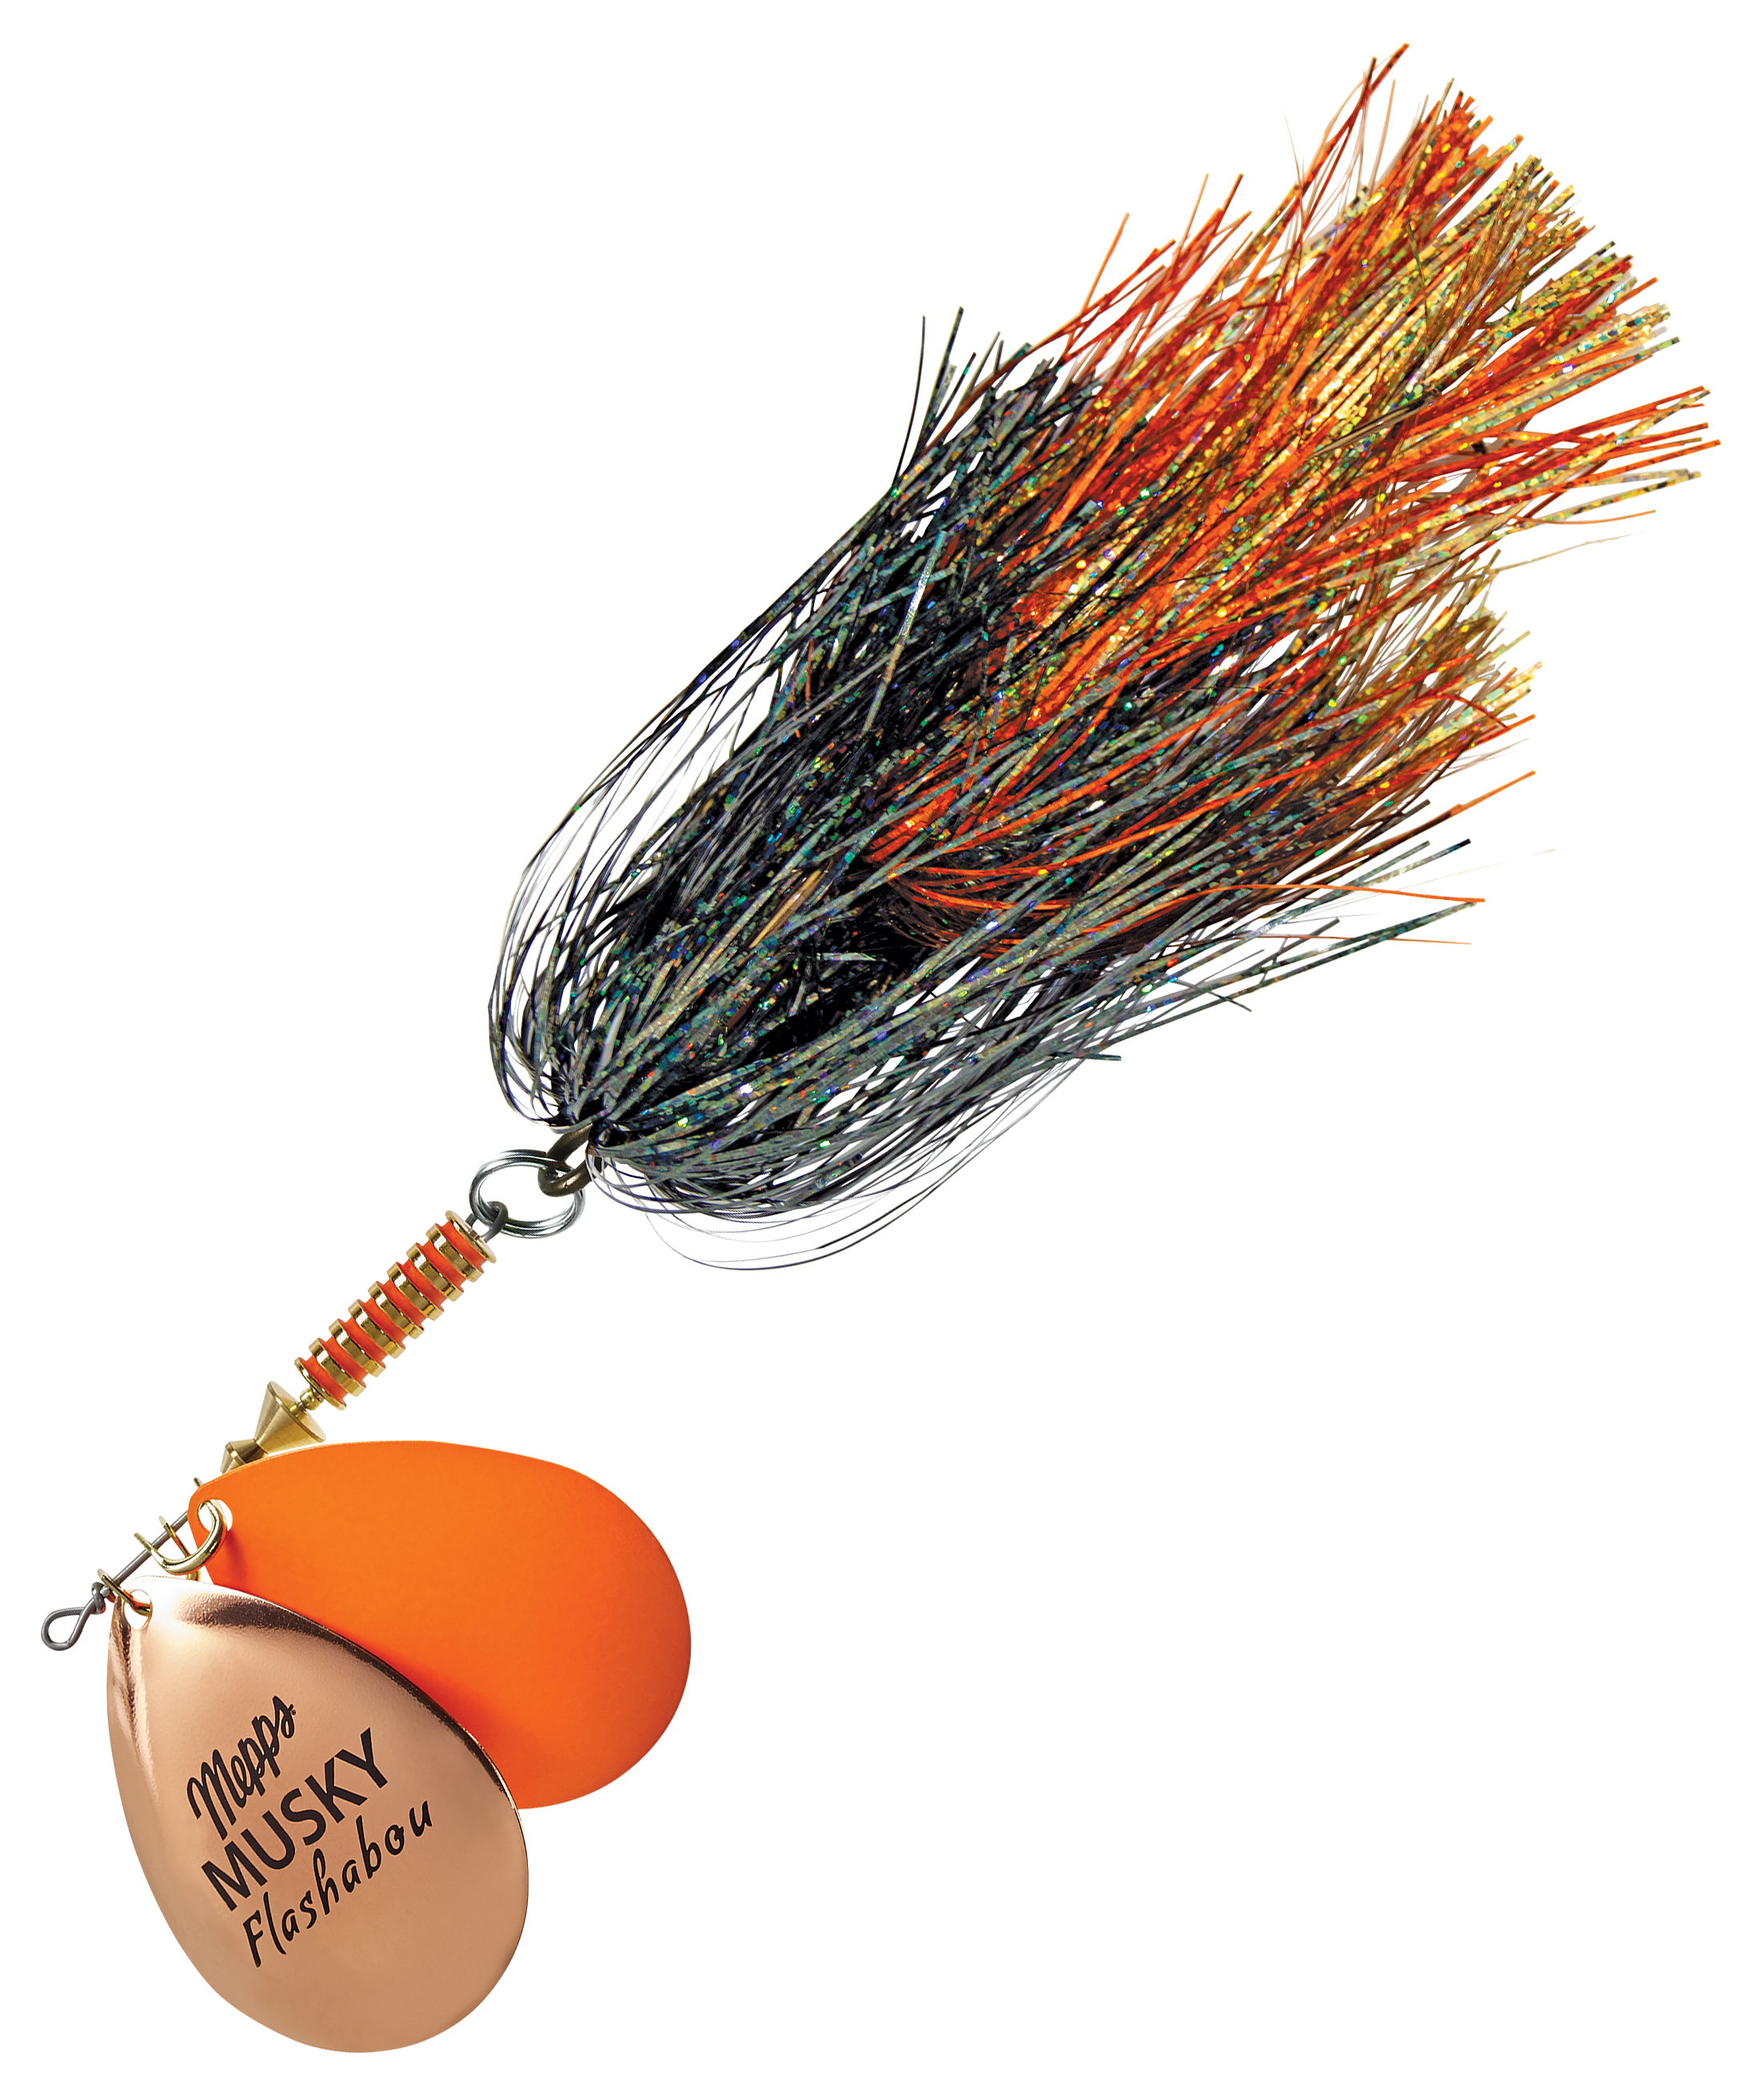 Mepps MFD7T PBR Double Blade Musky Flashabou 1 1/2 oz Copper,Hot